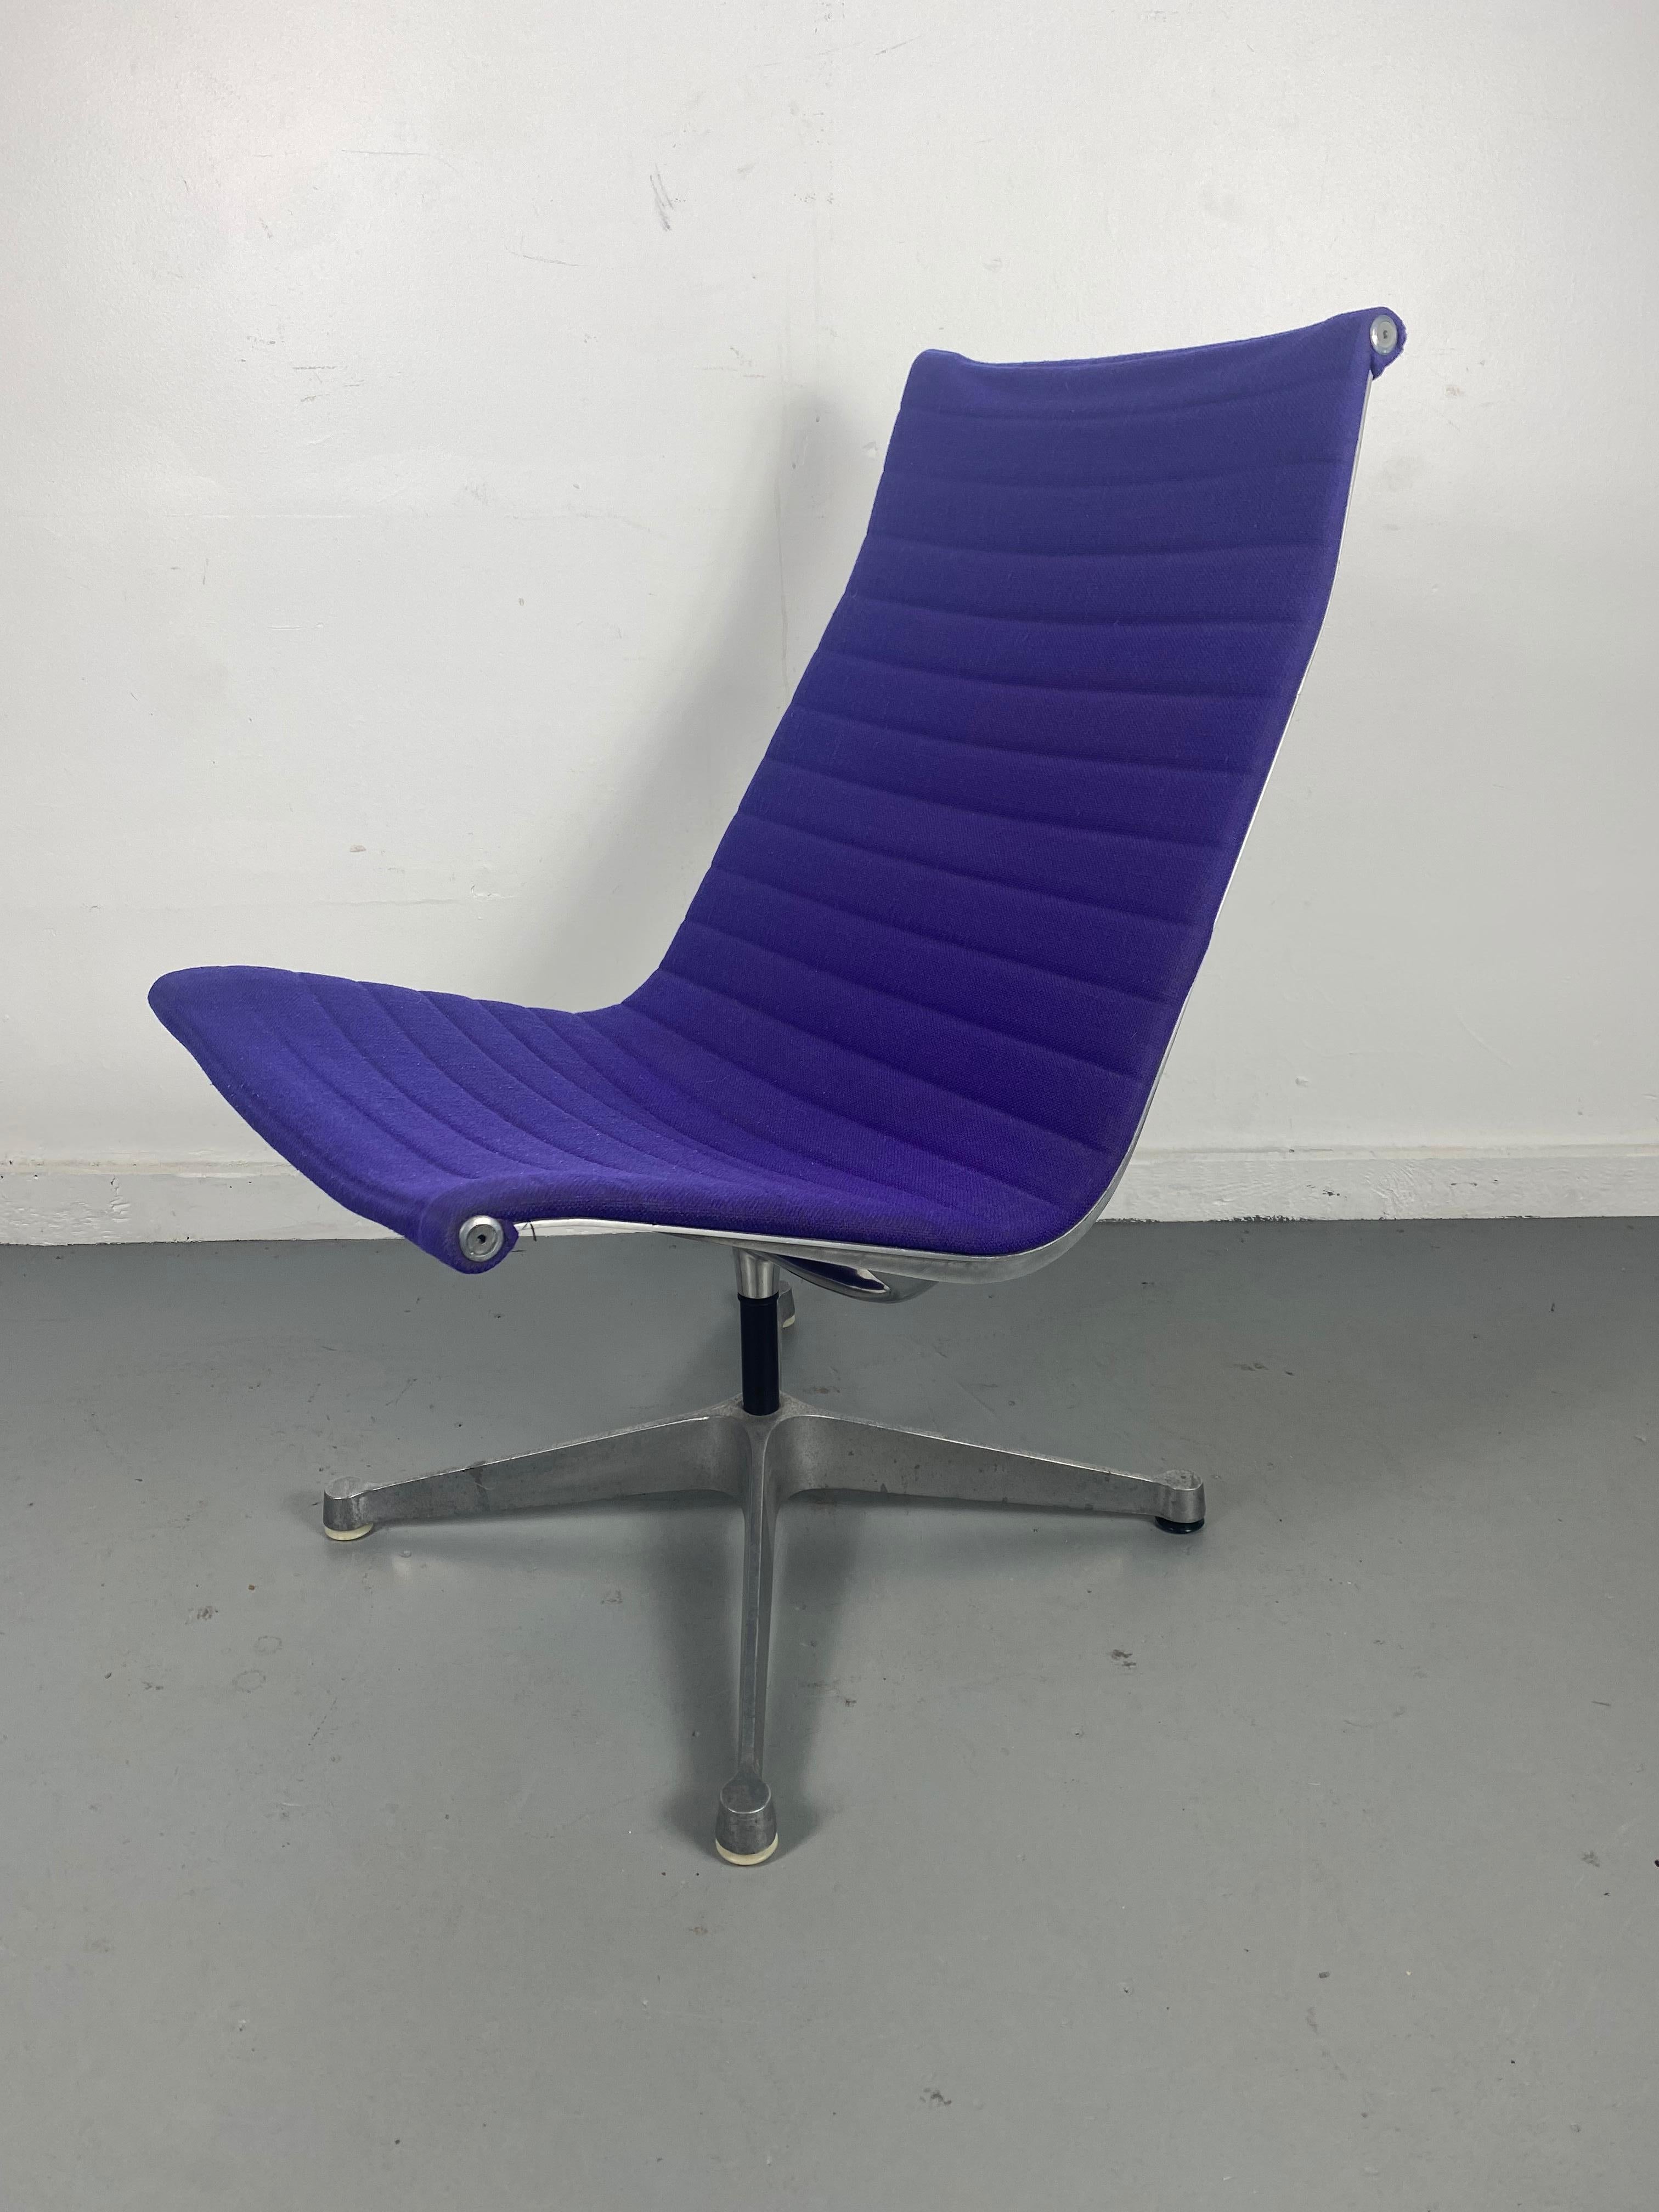 American Early Eames Aluminum Group Swivel Lounge Chair / Herman Miller, 4 star base